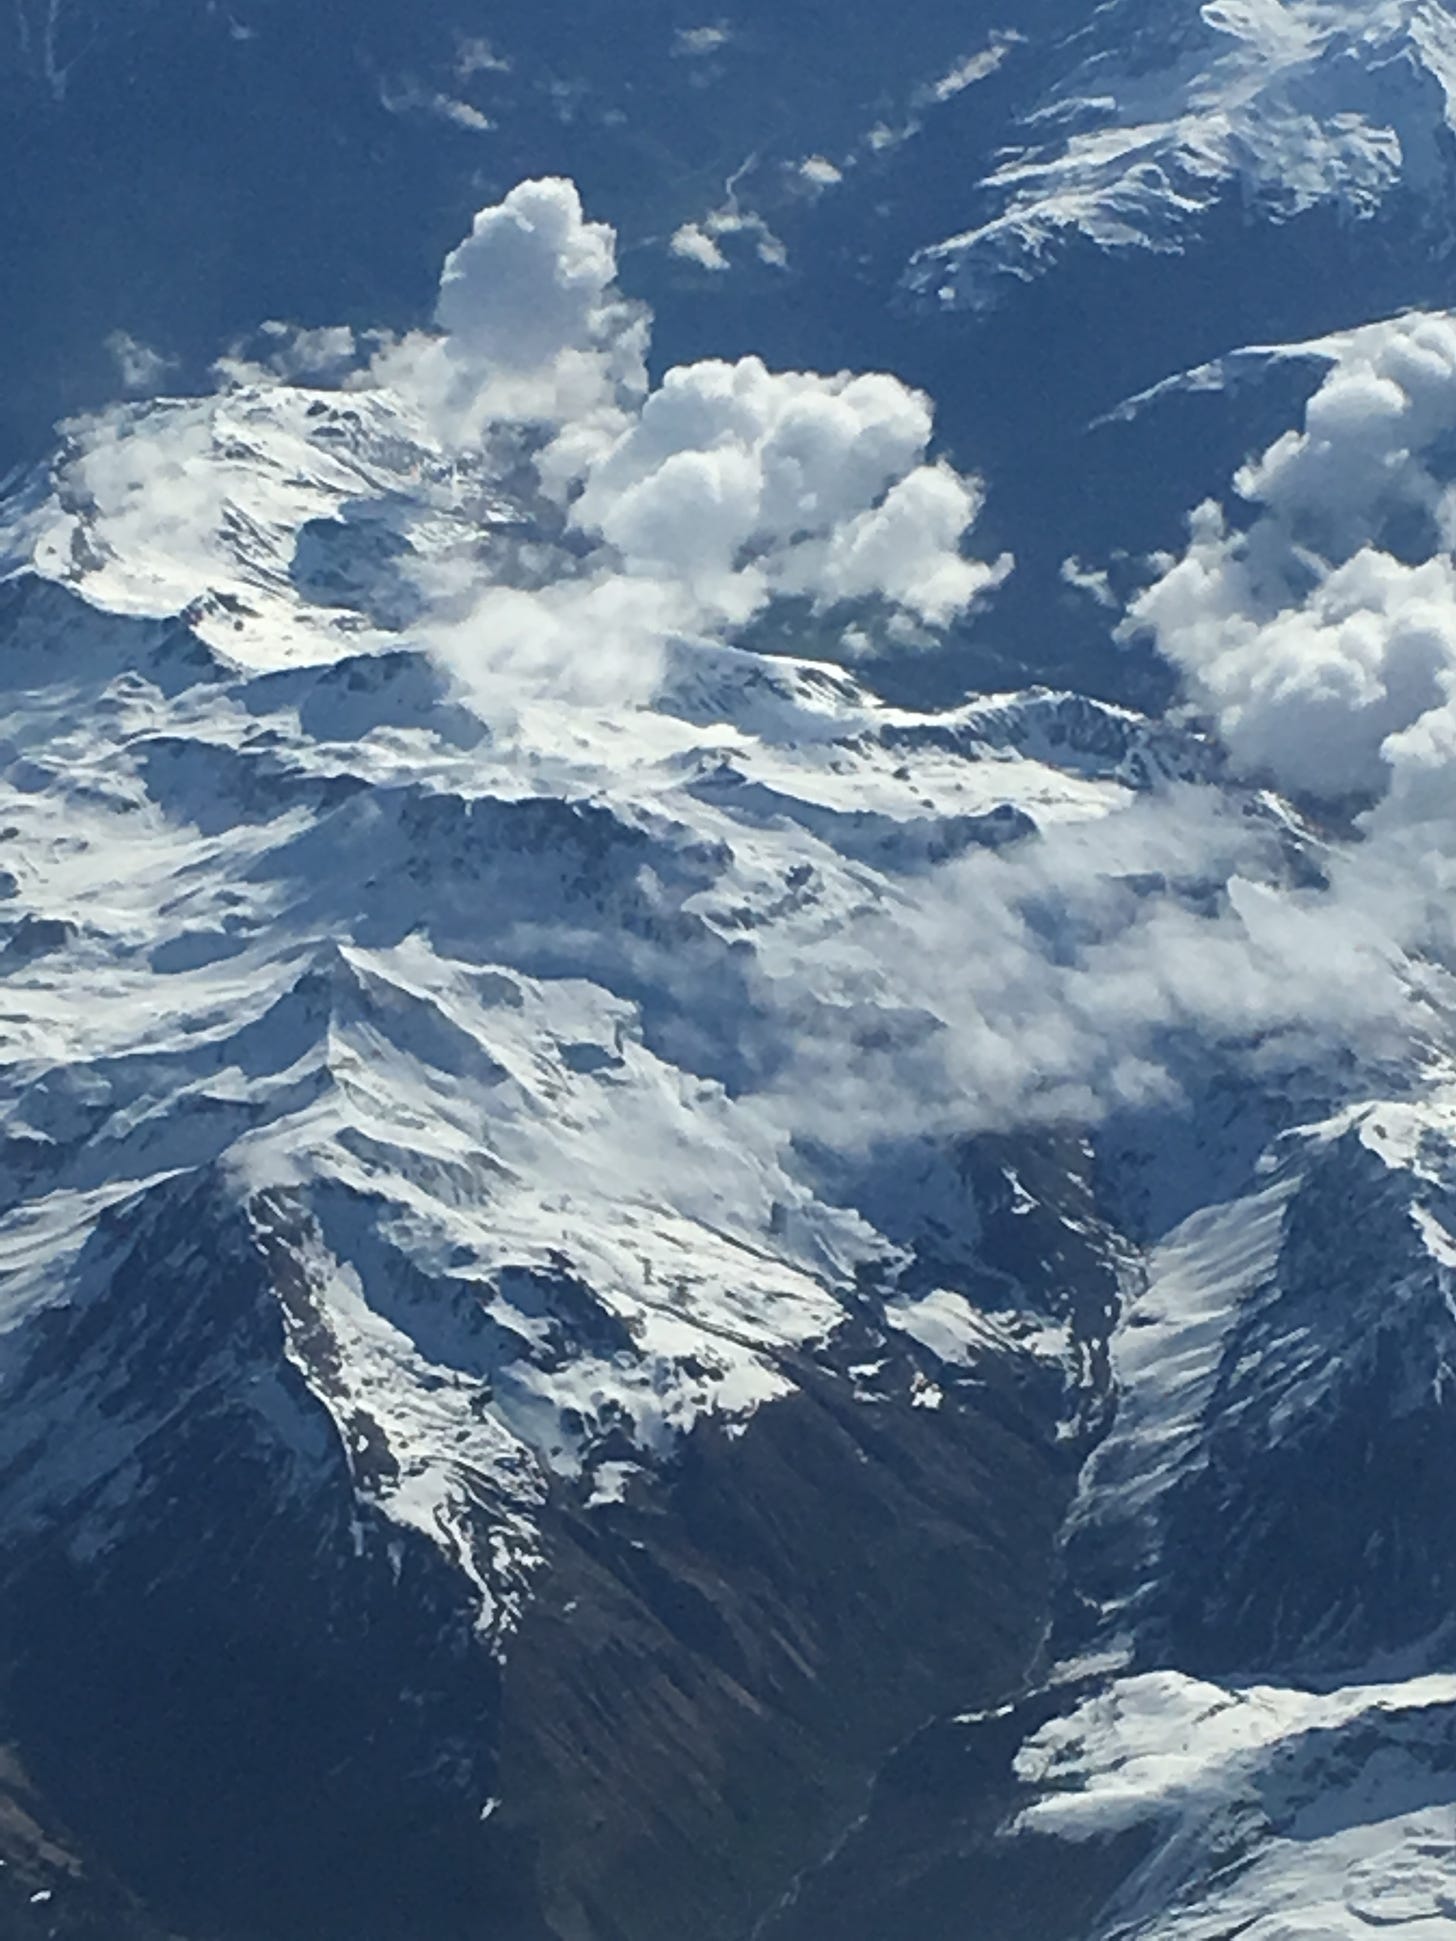 A view of the Andes, covered in snow and wreathed in clouds.